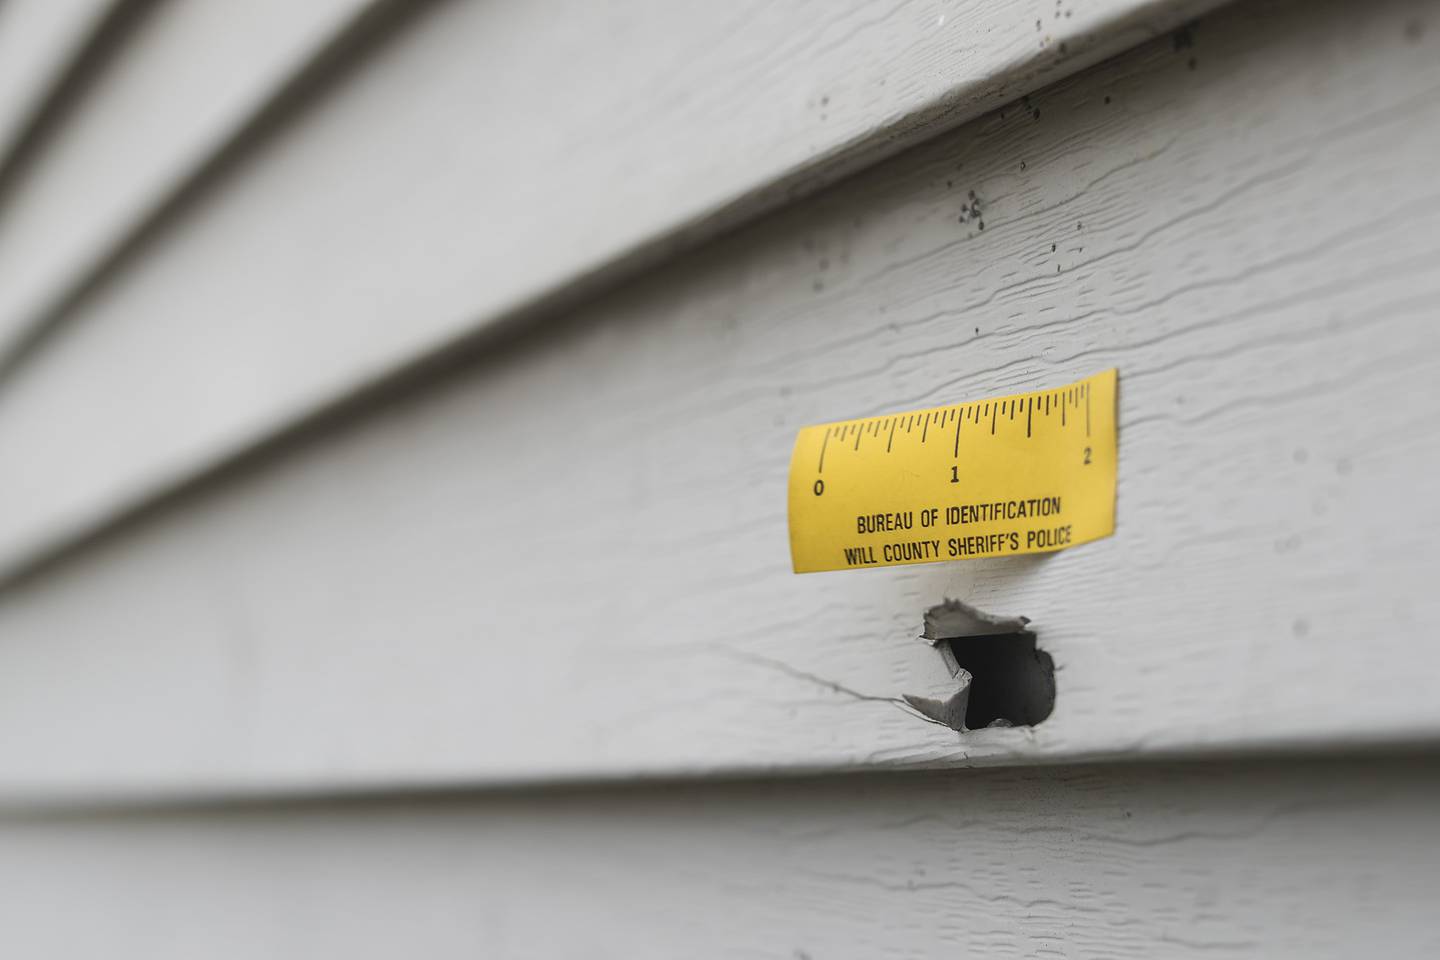 A bullet hole sits in the siding of a house on Tuesday, Dec. 23, 2020, on the 800-block of Second Avenue in Joliet, Ill. According to Will/Grundy Major Crimes Task Force, on Monday evening officers responded to a 911 call of a man threatening to shoot bystanders. The man threatened officers and after a standoff, police fired shots, killing the man.